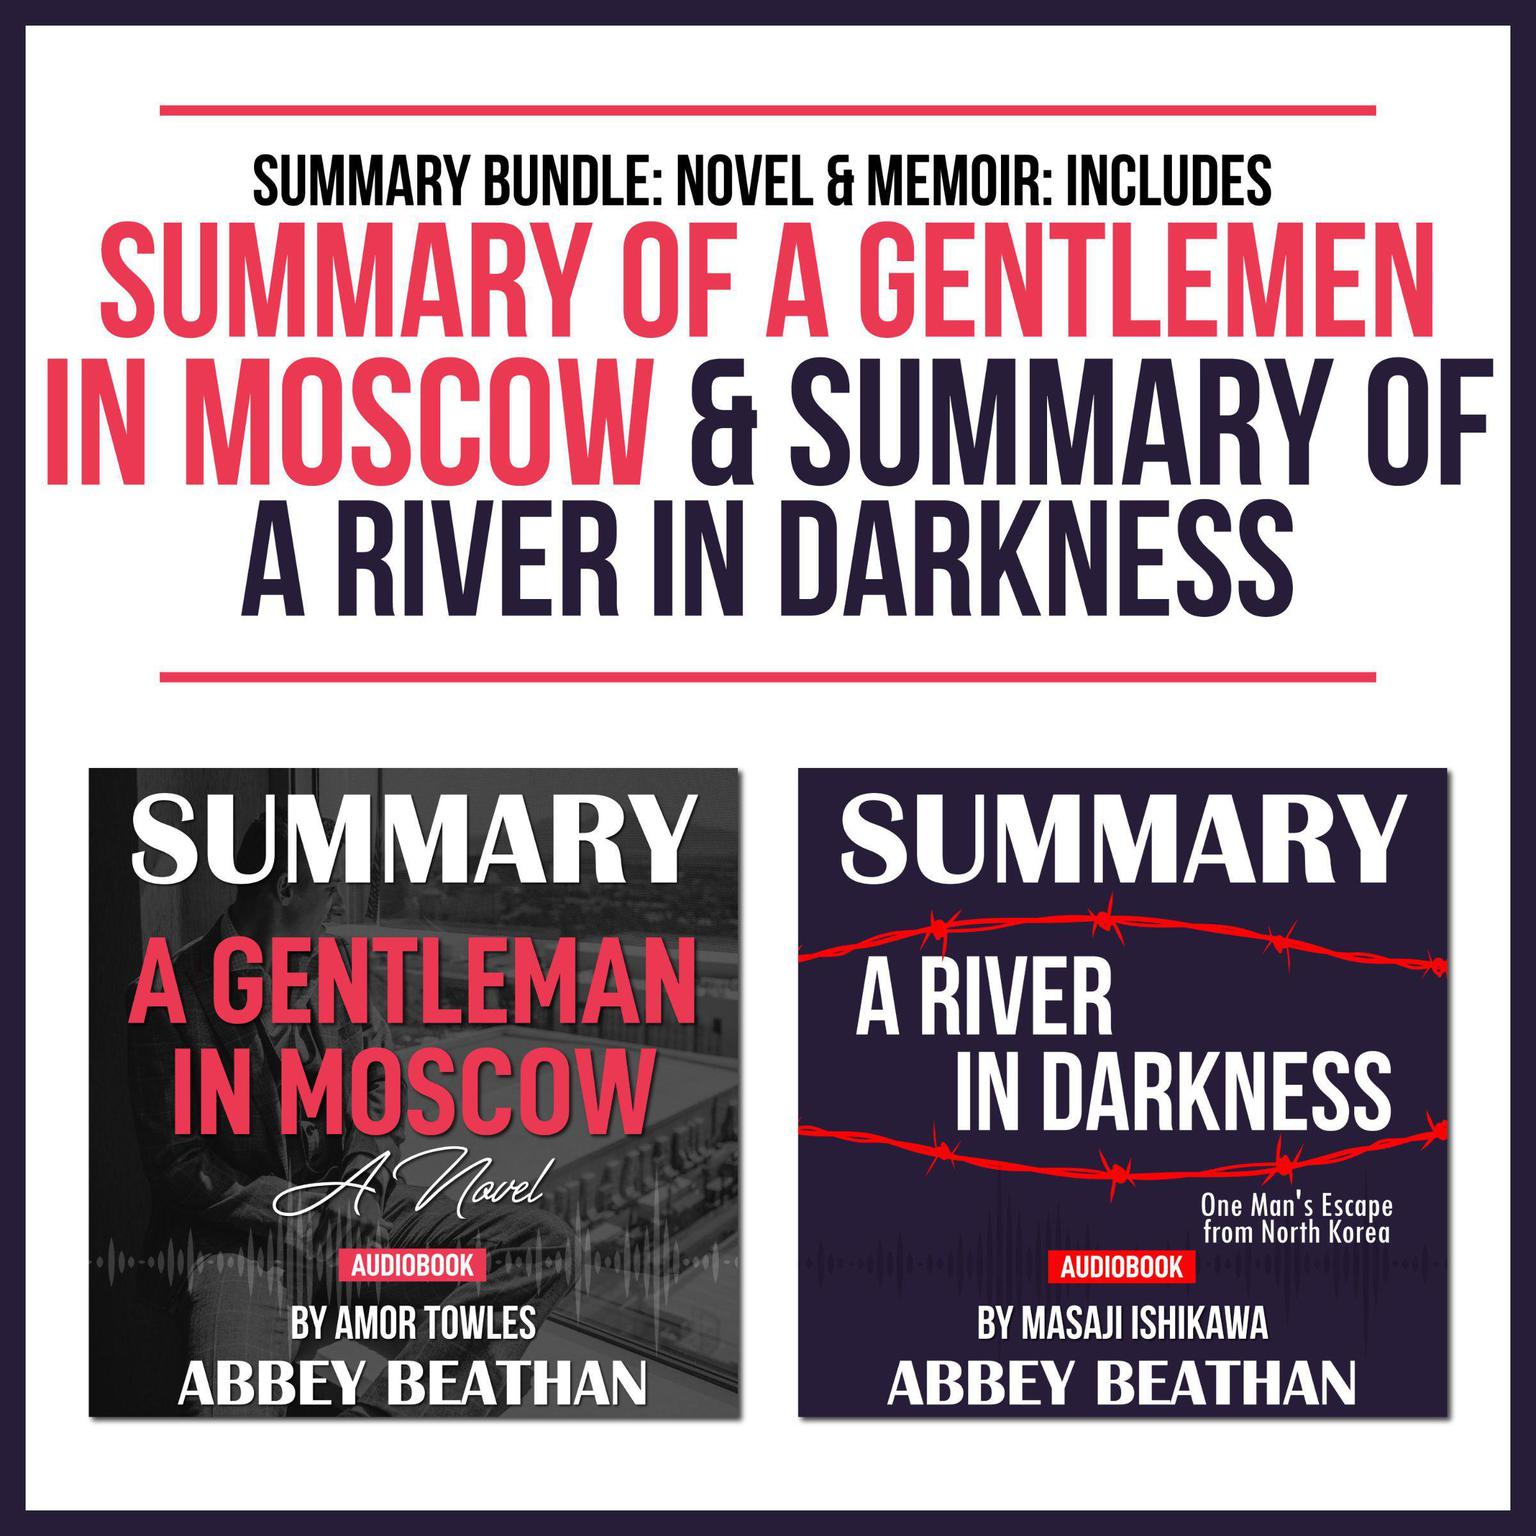 Summary Bundle: Novel & Memoir: Includes Summary of A Gentlemen in Moscow & Summary of A River in Darkness Audiobook, by Abbey Beathan